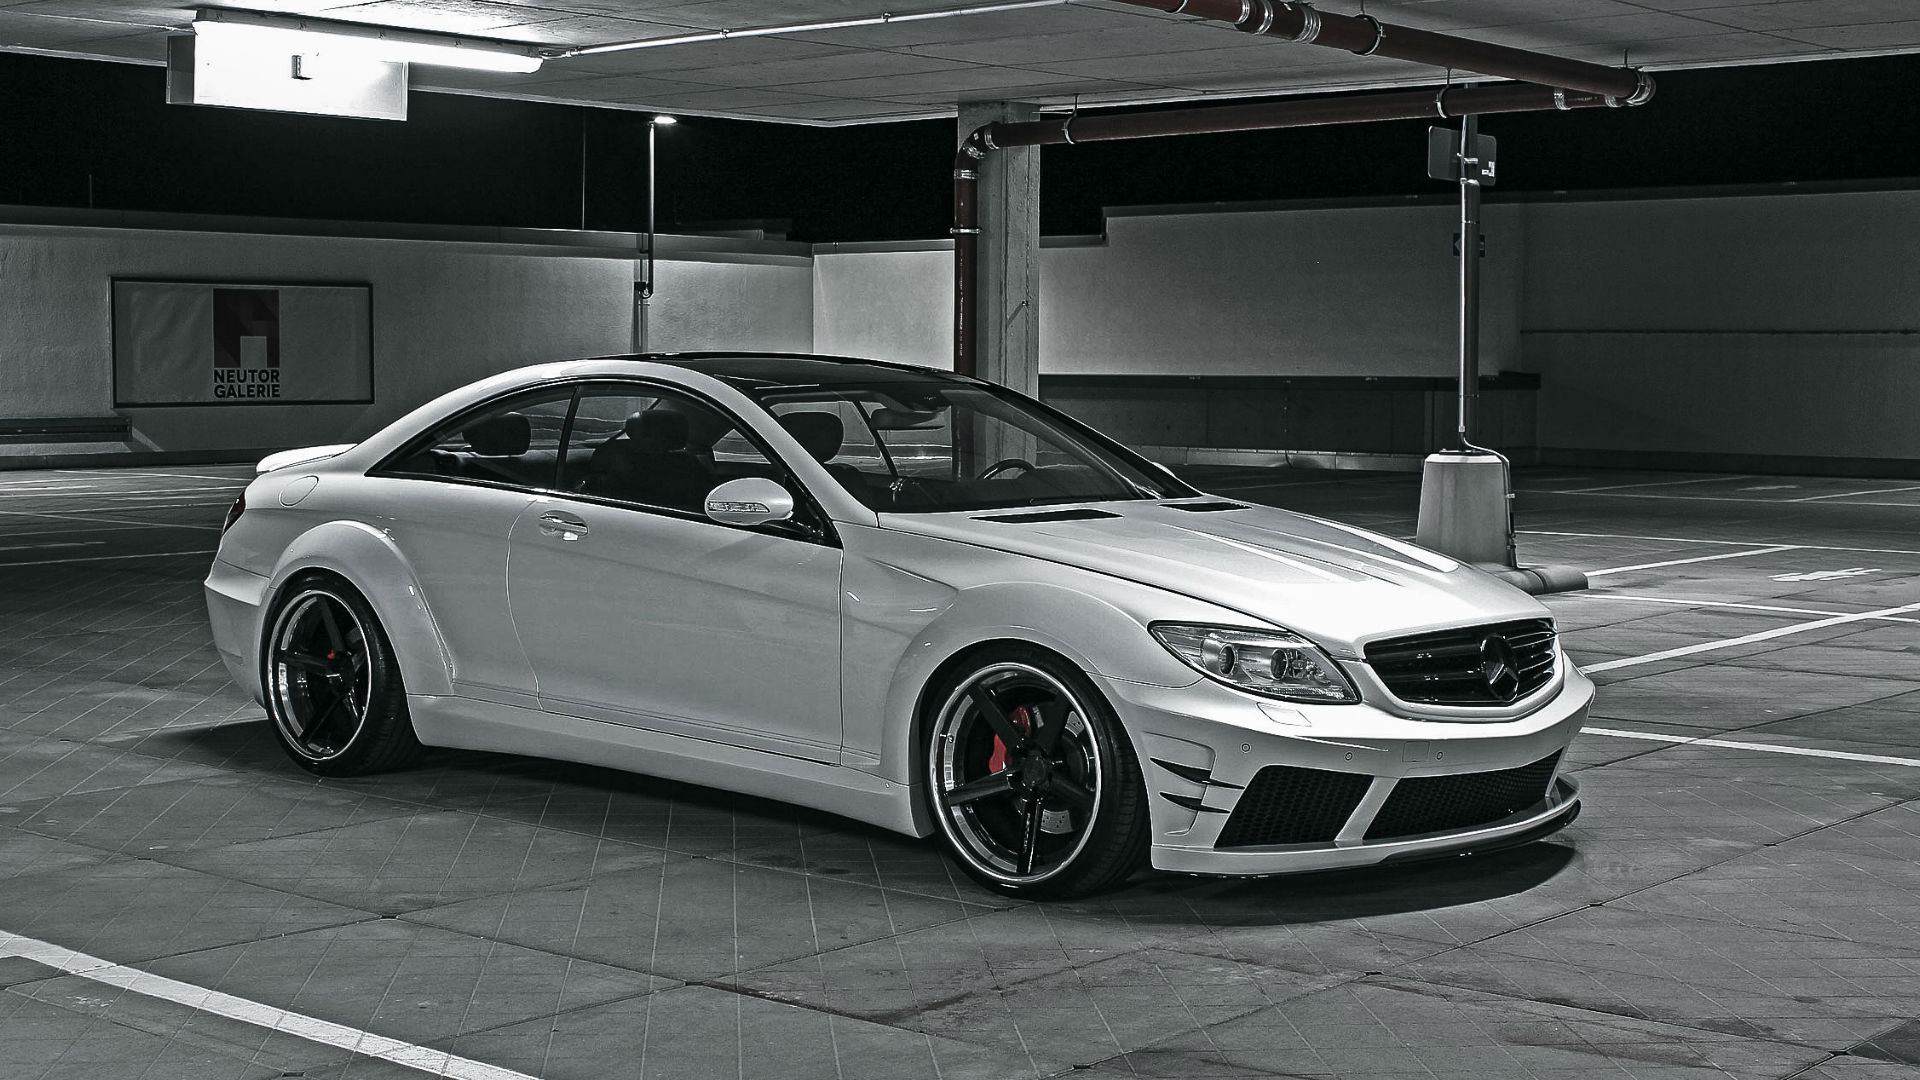 Mercedes Cl 500 C216 Widebody Tuning Pd Black Edition V2 Widebody Aerodynamic Kit M D Exclusive Cardesign